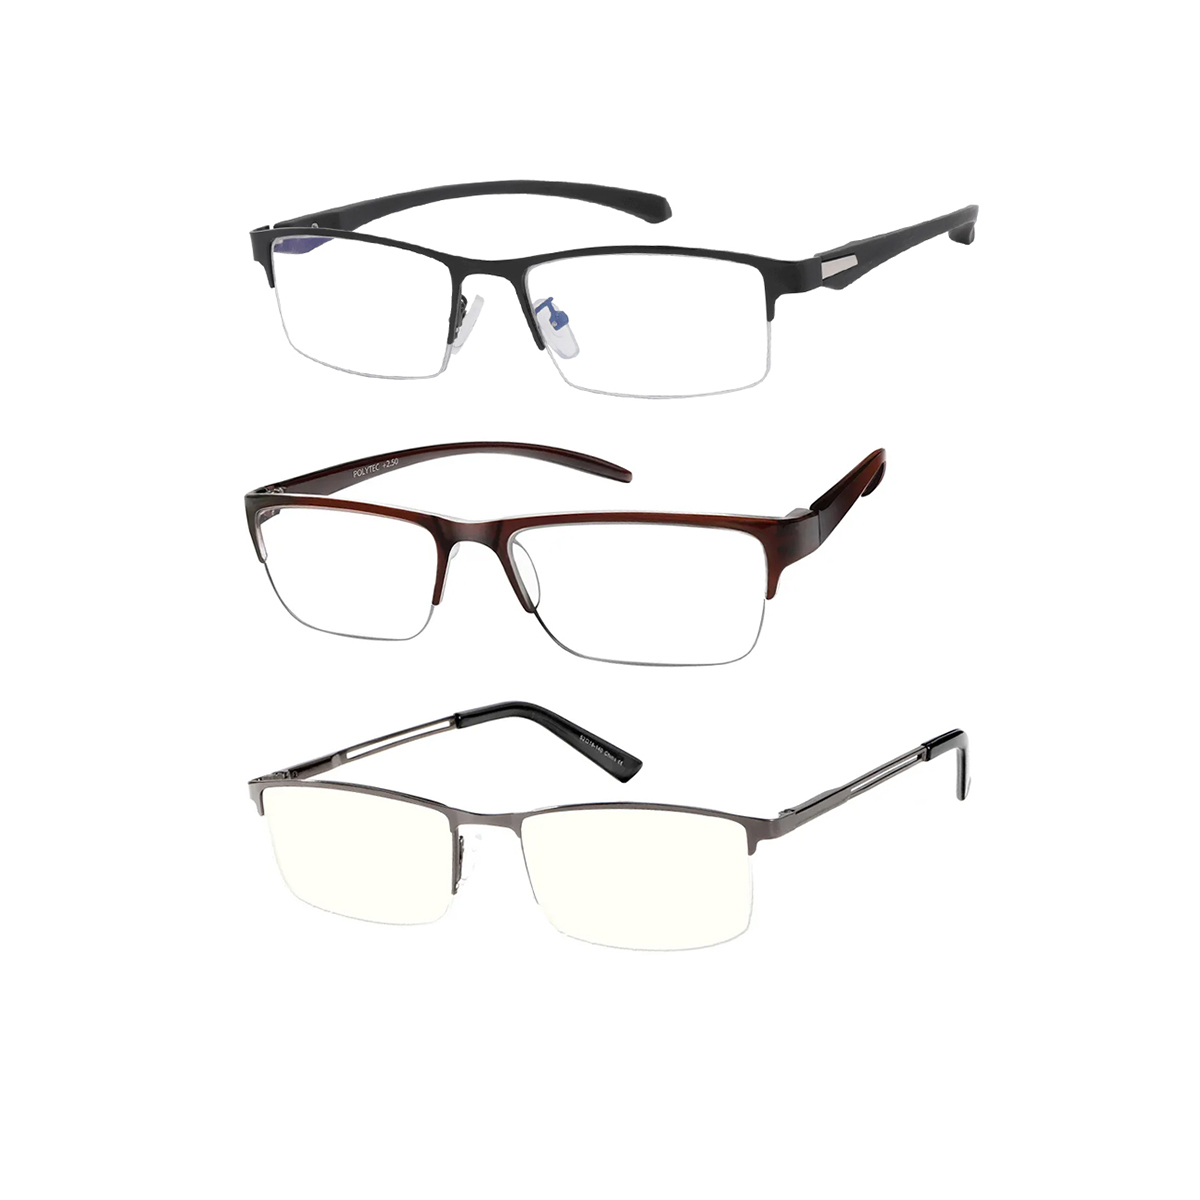 Reading Glasses Collection Robber $24.99/Set